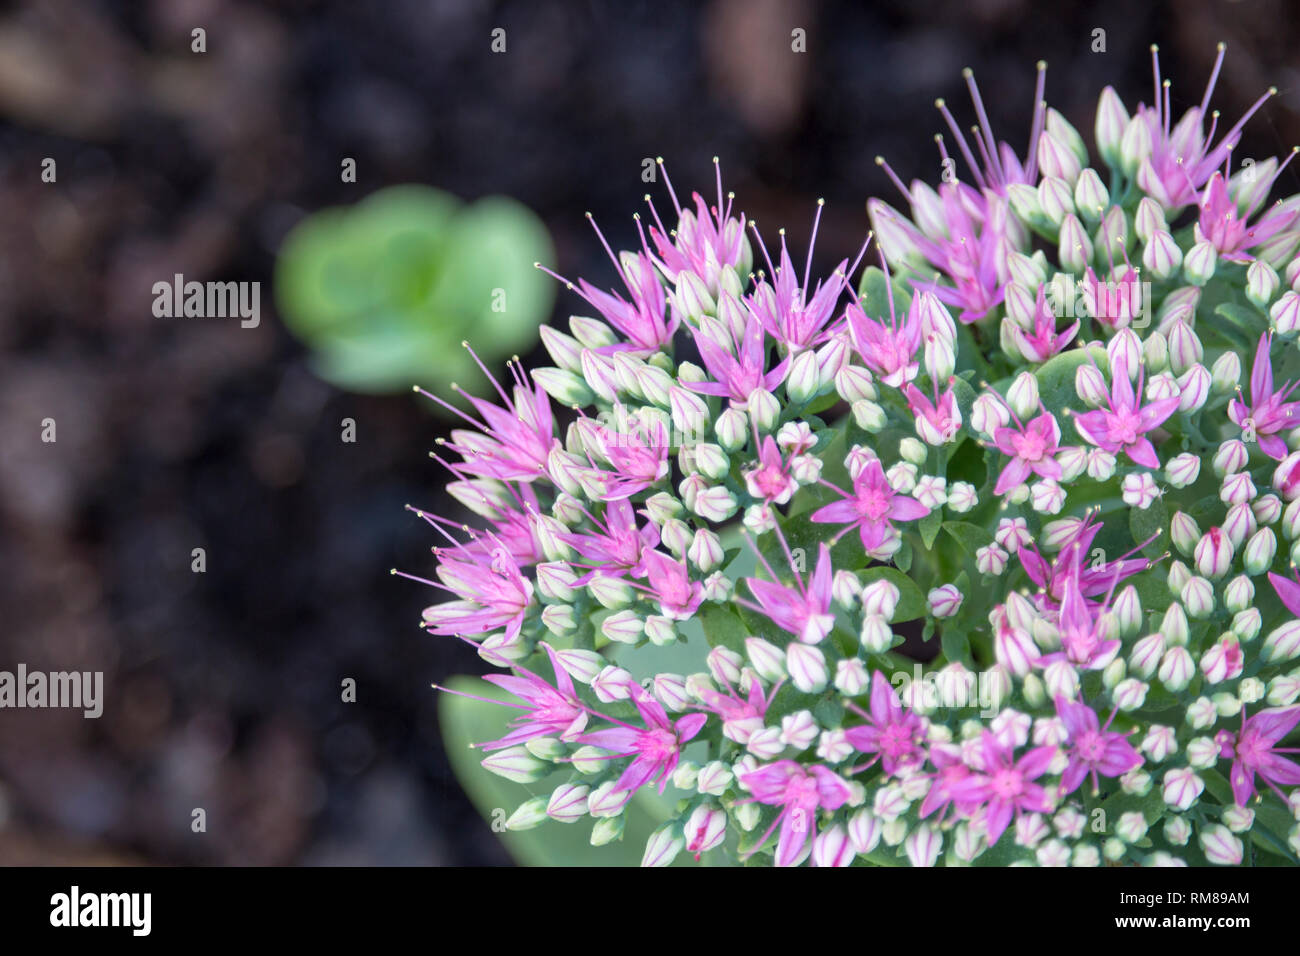 Close-up of pink orpine stonecrop flowers in full bloom, also known as sedum telephium. Shallow depth of field. Stock Photo